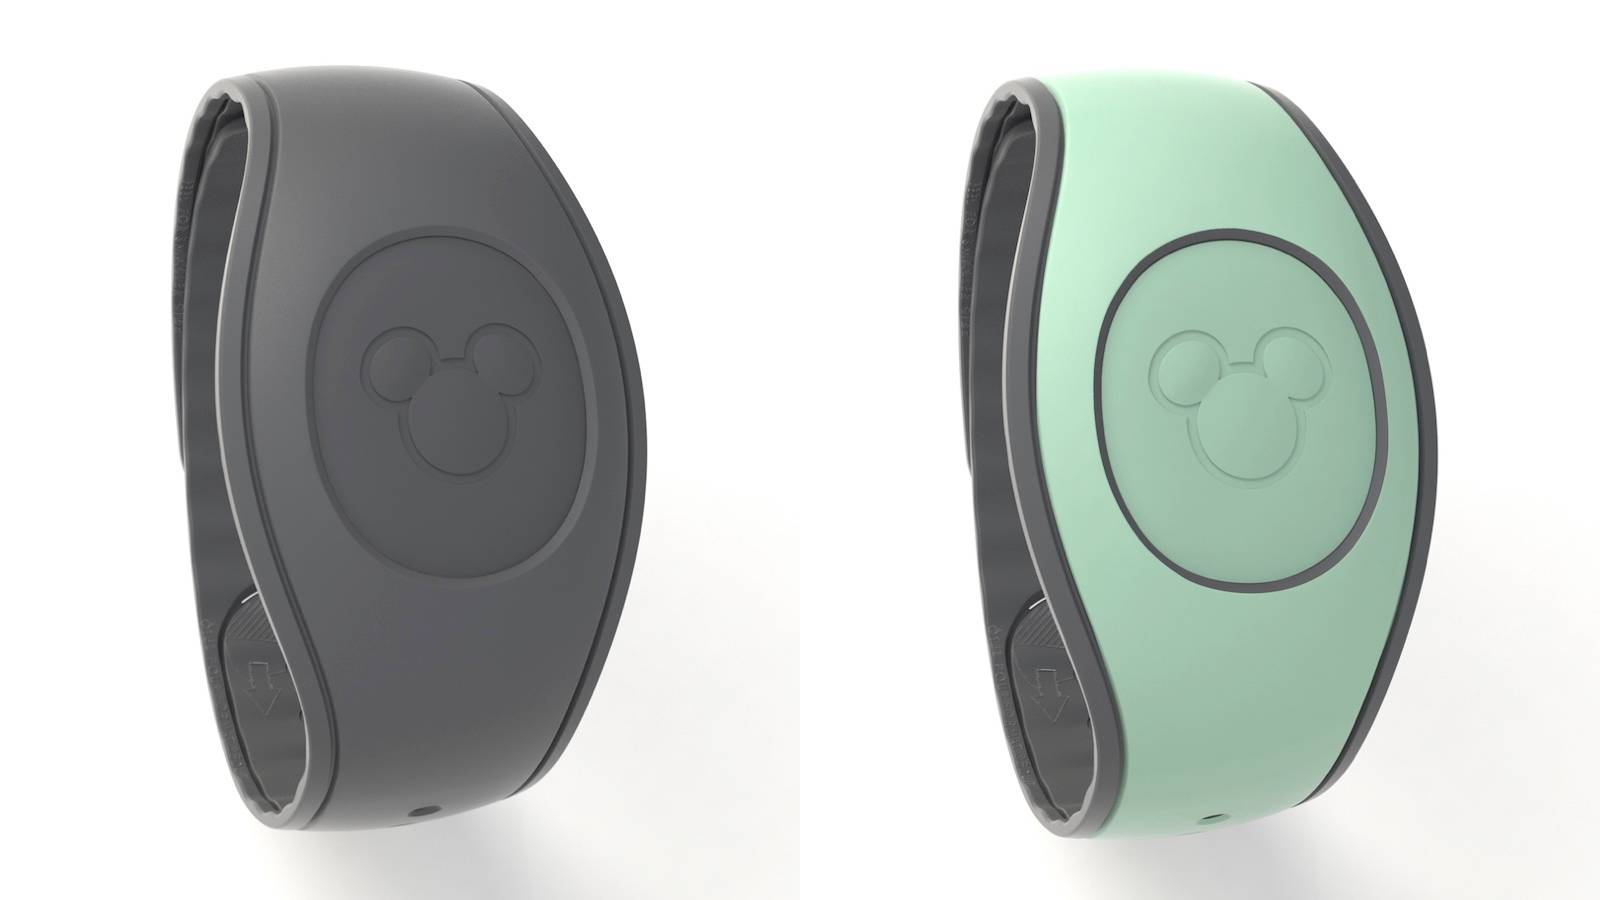 MagicBand+ now available for Walt Disney World resort guests and